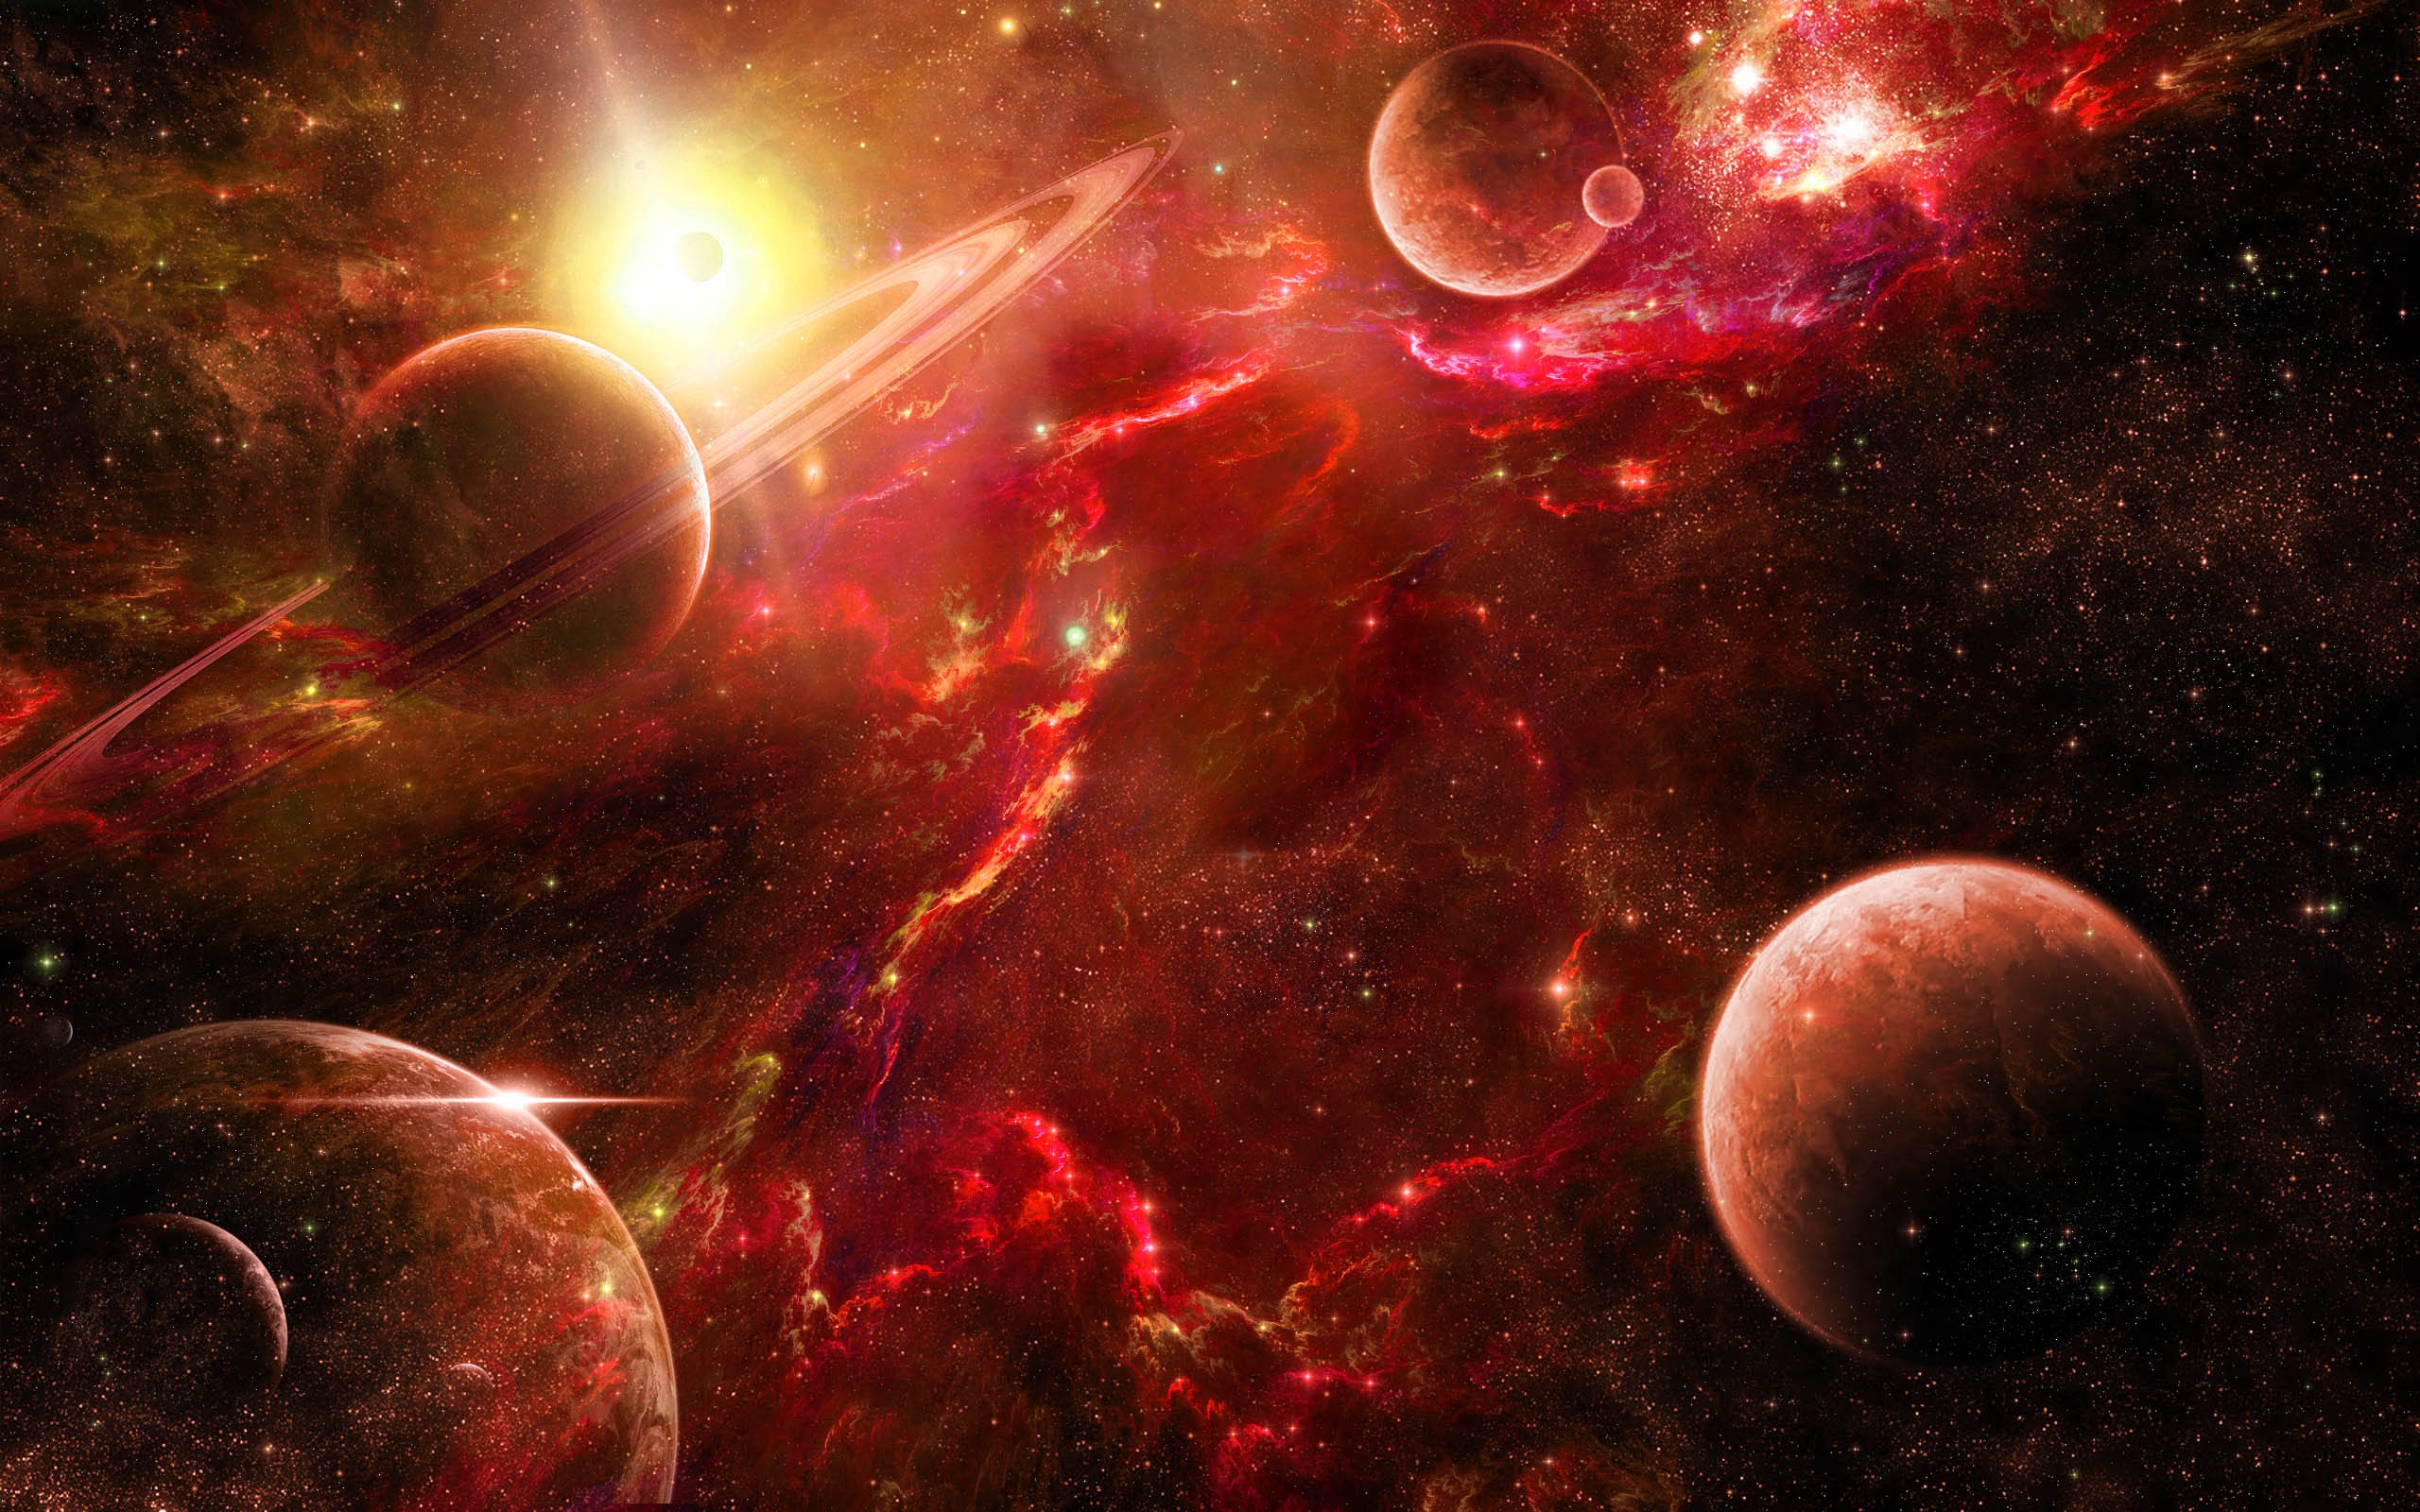 Outer Space Wallpaper Planets - WallpaperSafari